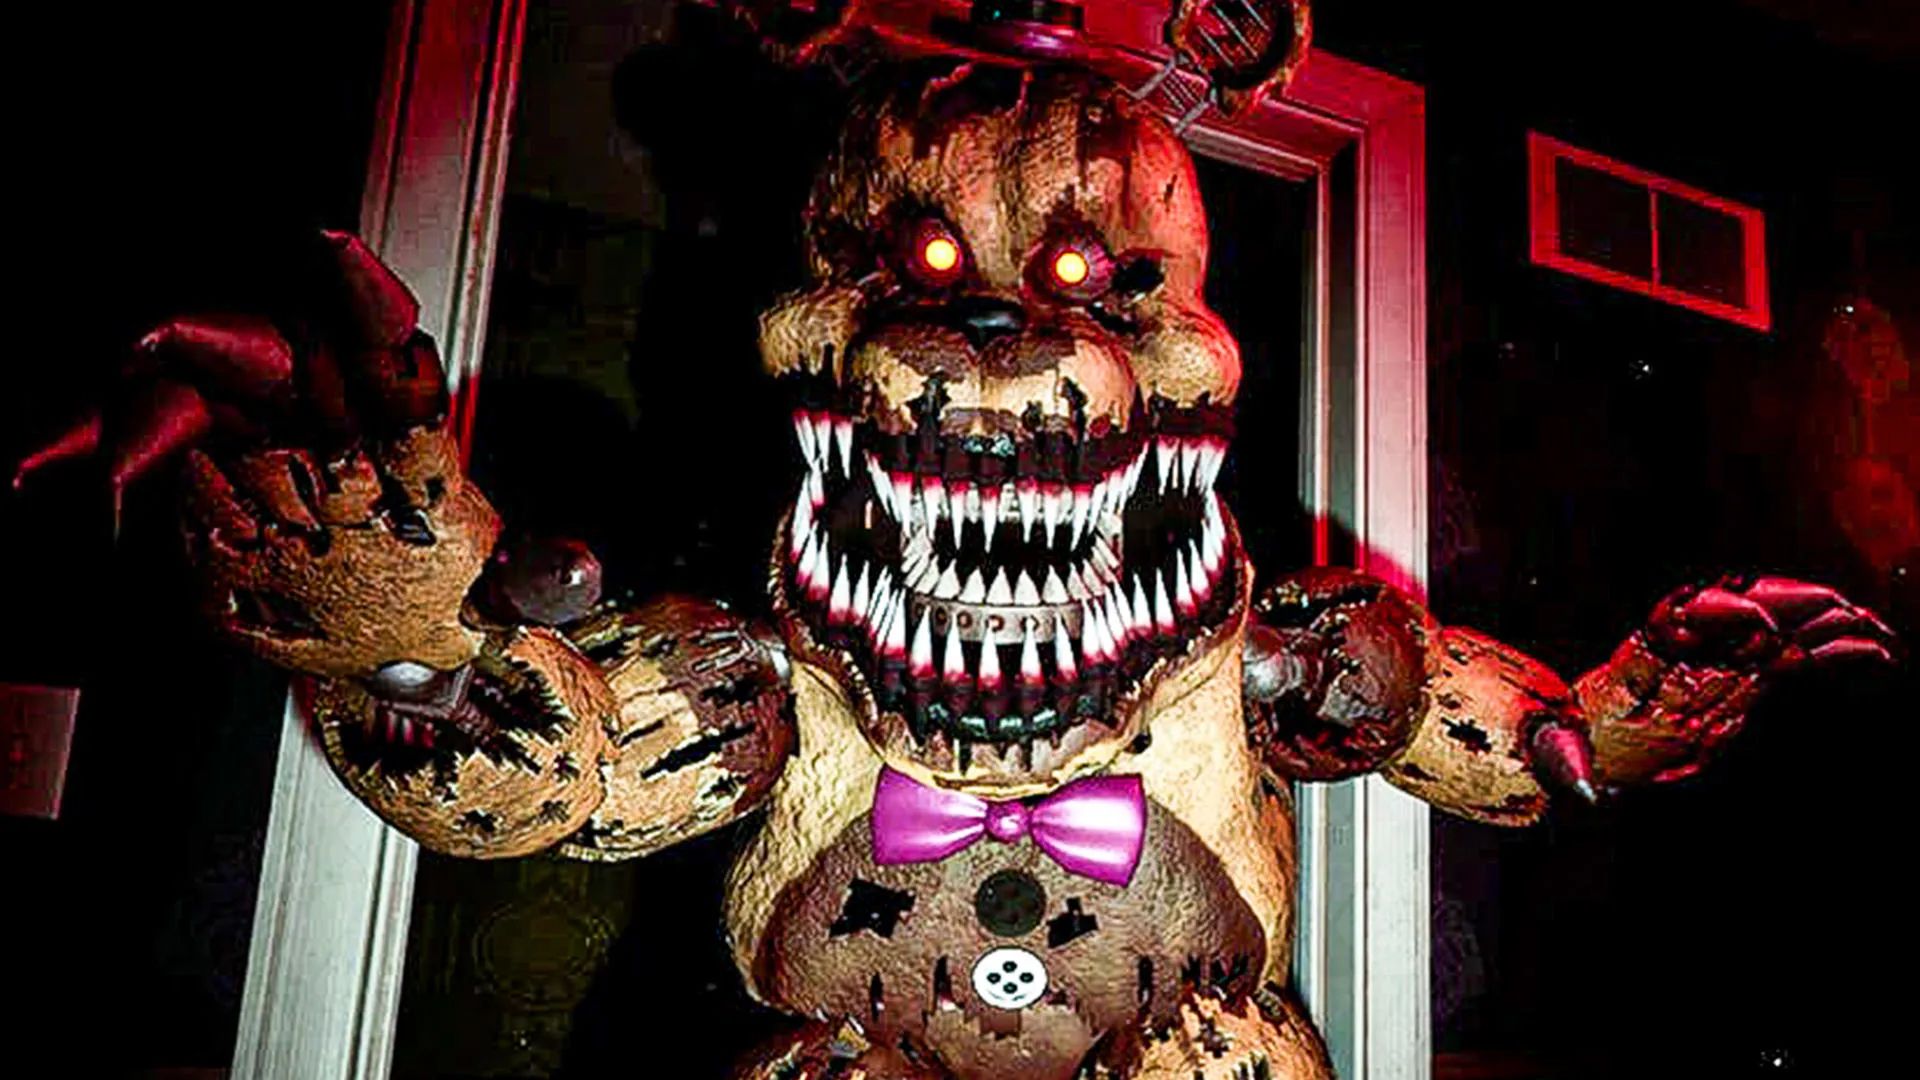 Five Nights At Freddy's Has A Dark Proposition For Fans - video